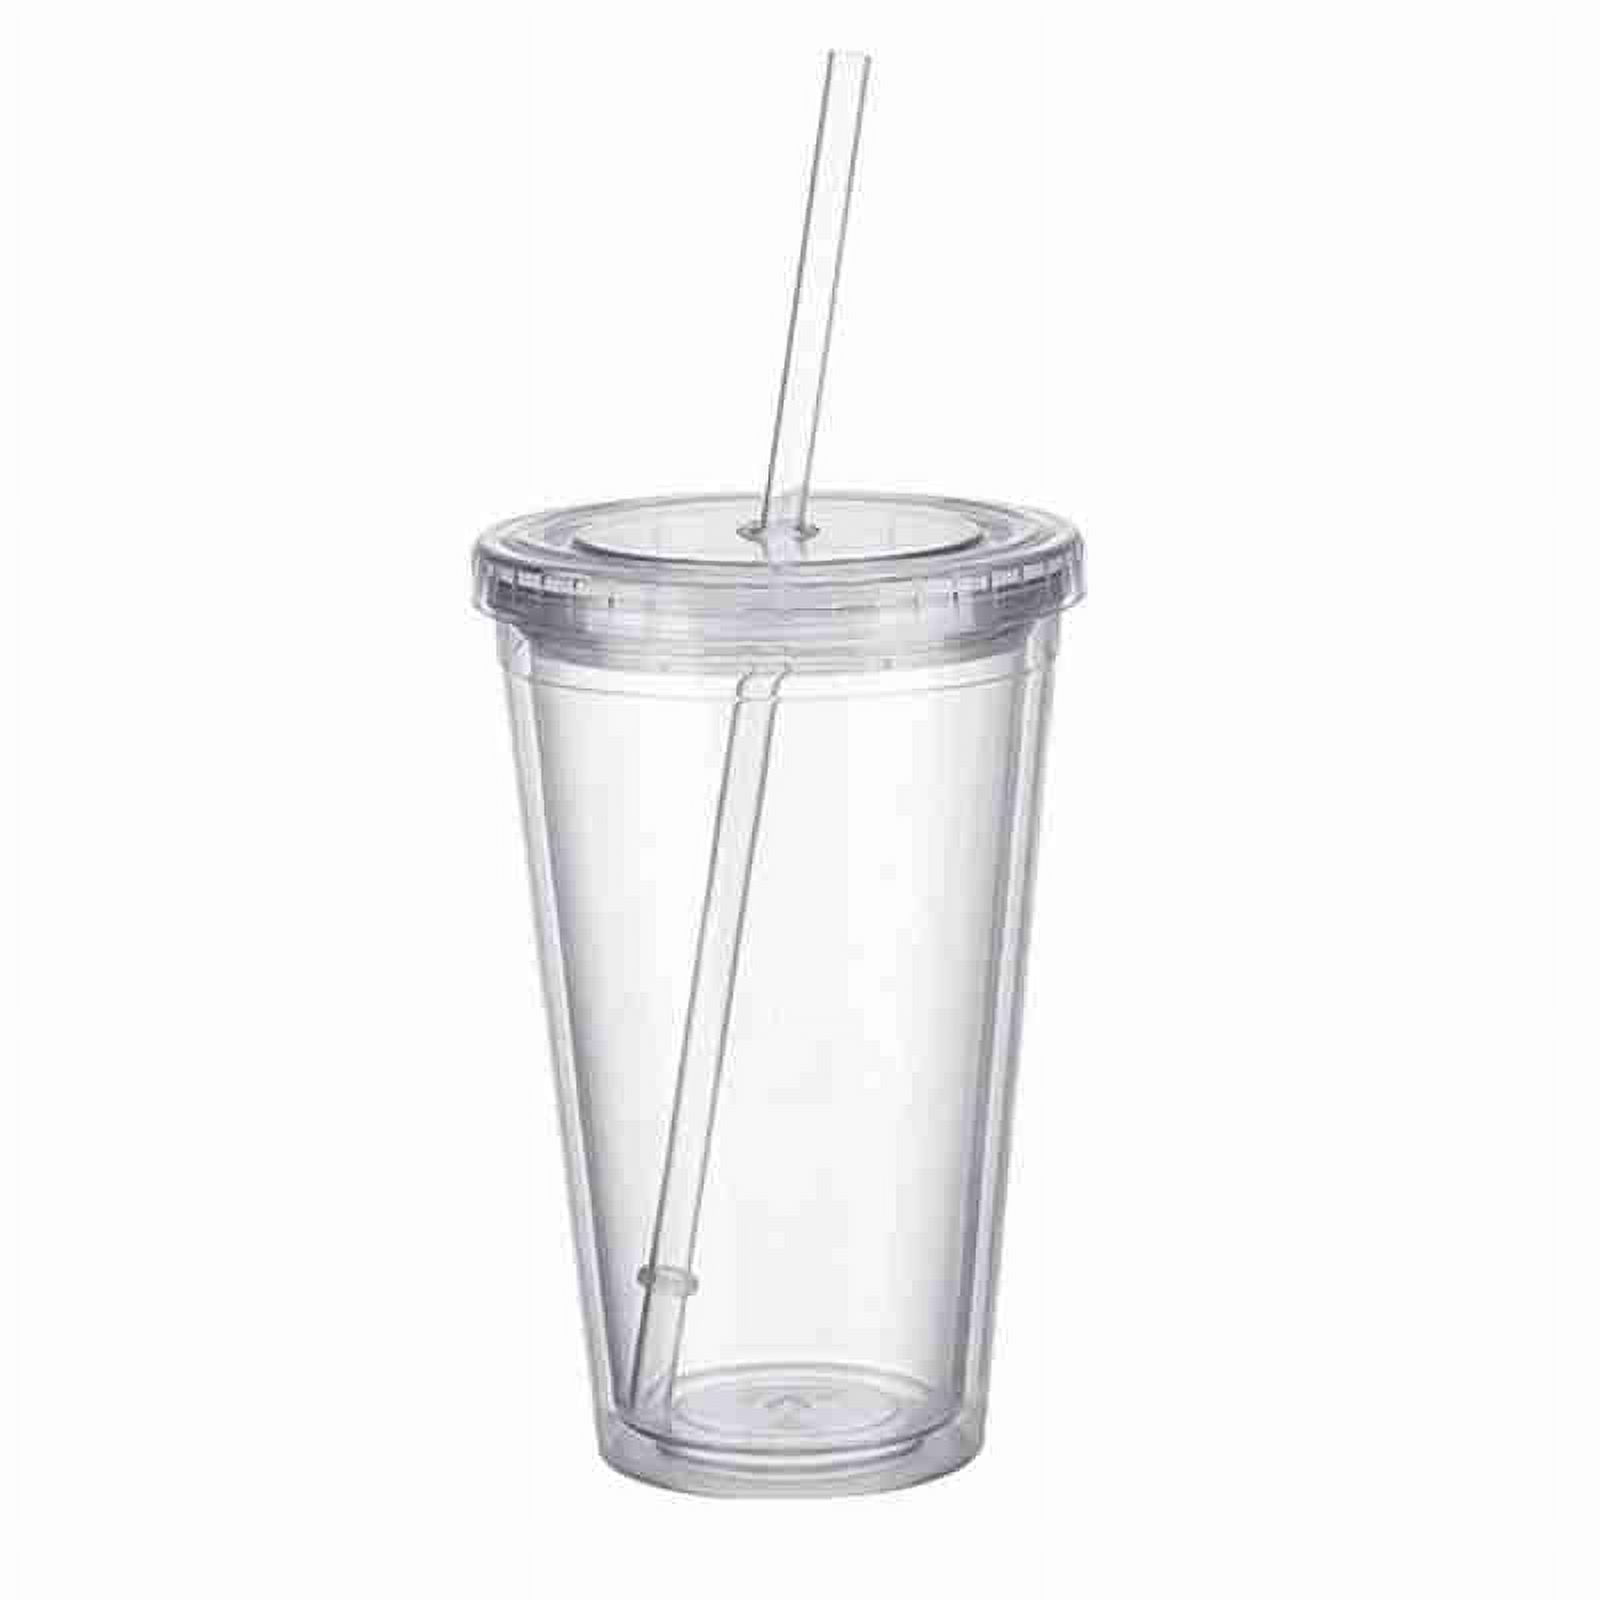 500ml Double-layer Walled Cup Plastic Clear with Lid&Straw Cup TOP Drink  E7Q0 